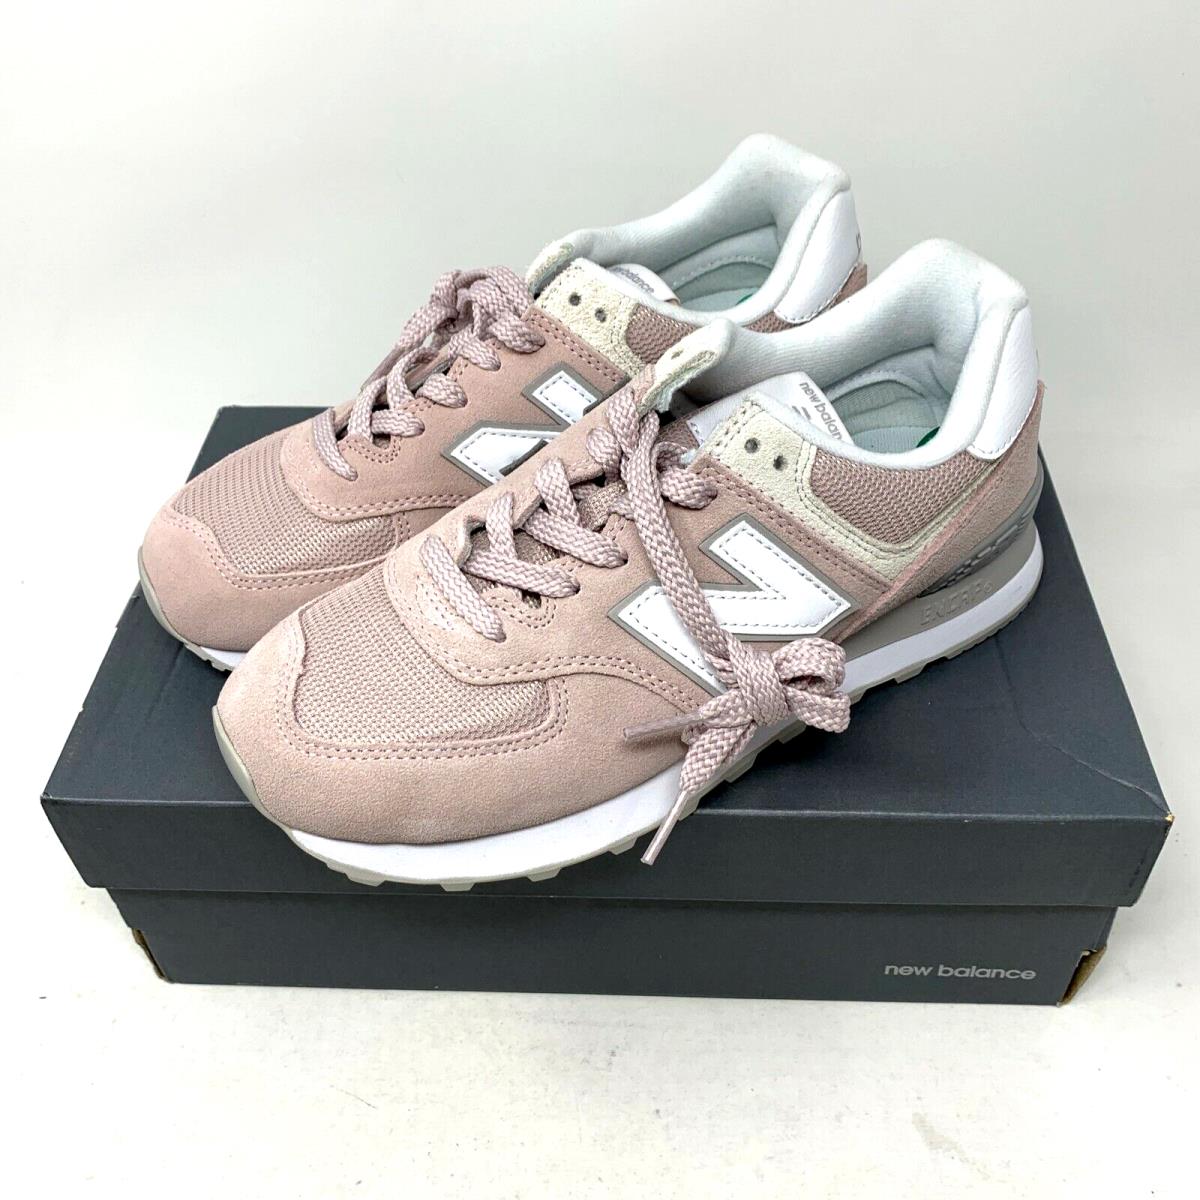 Balance Women`s 8 - 574 V2 Sneakers Pink Suede/leather Shoes Faded Rose